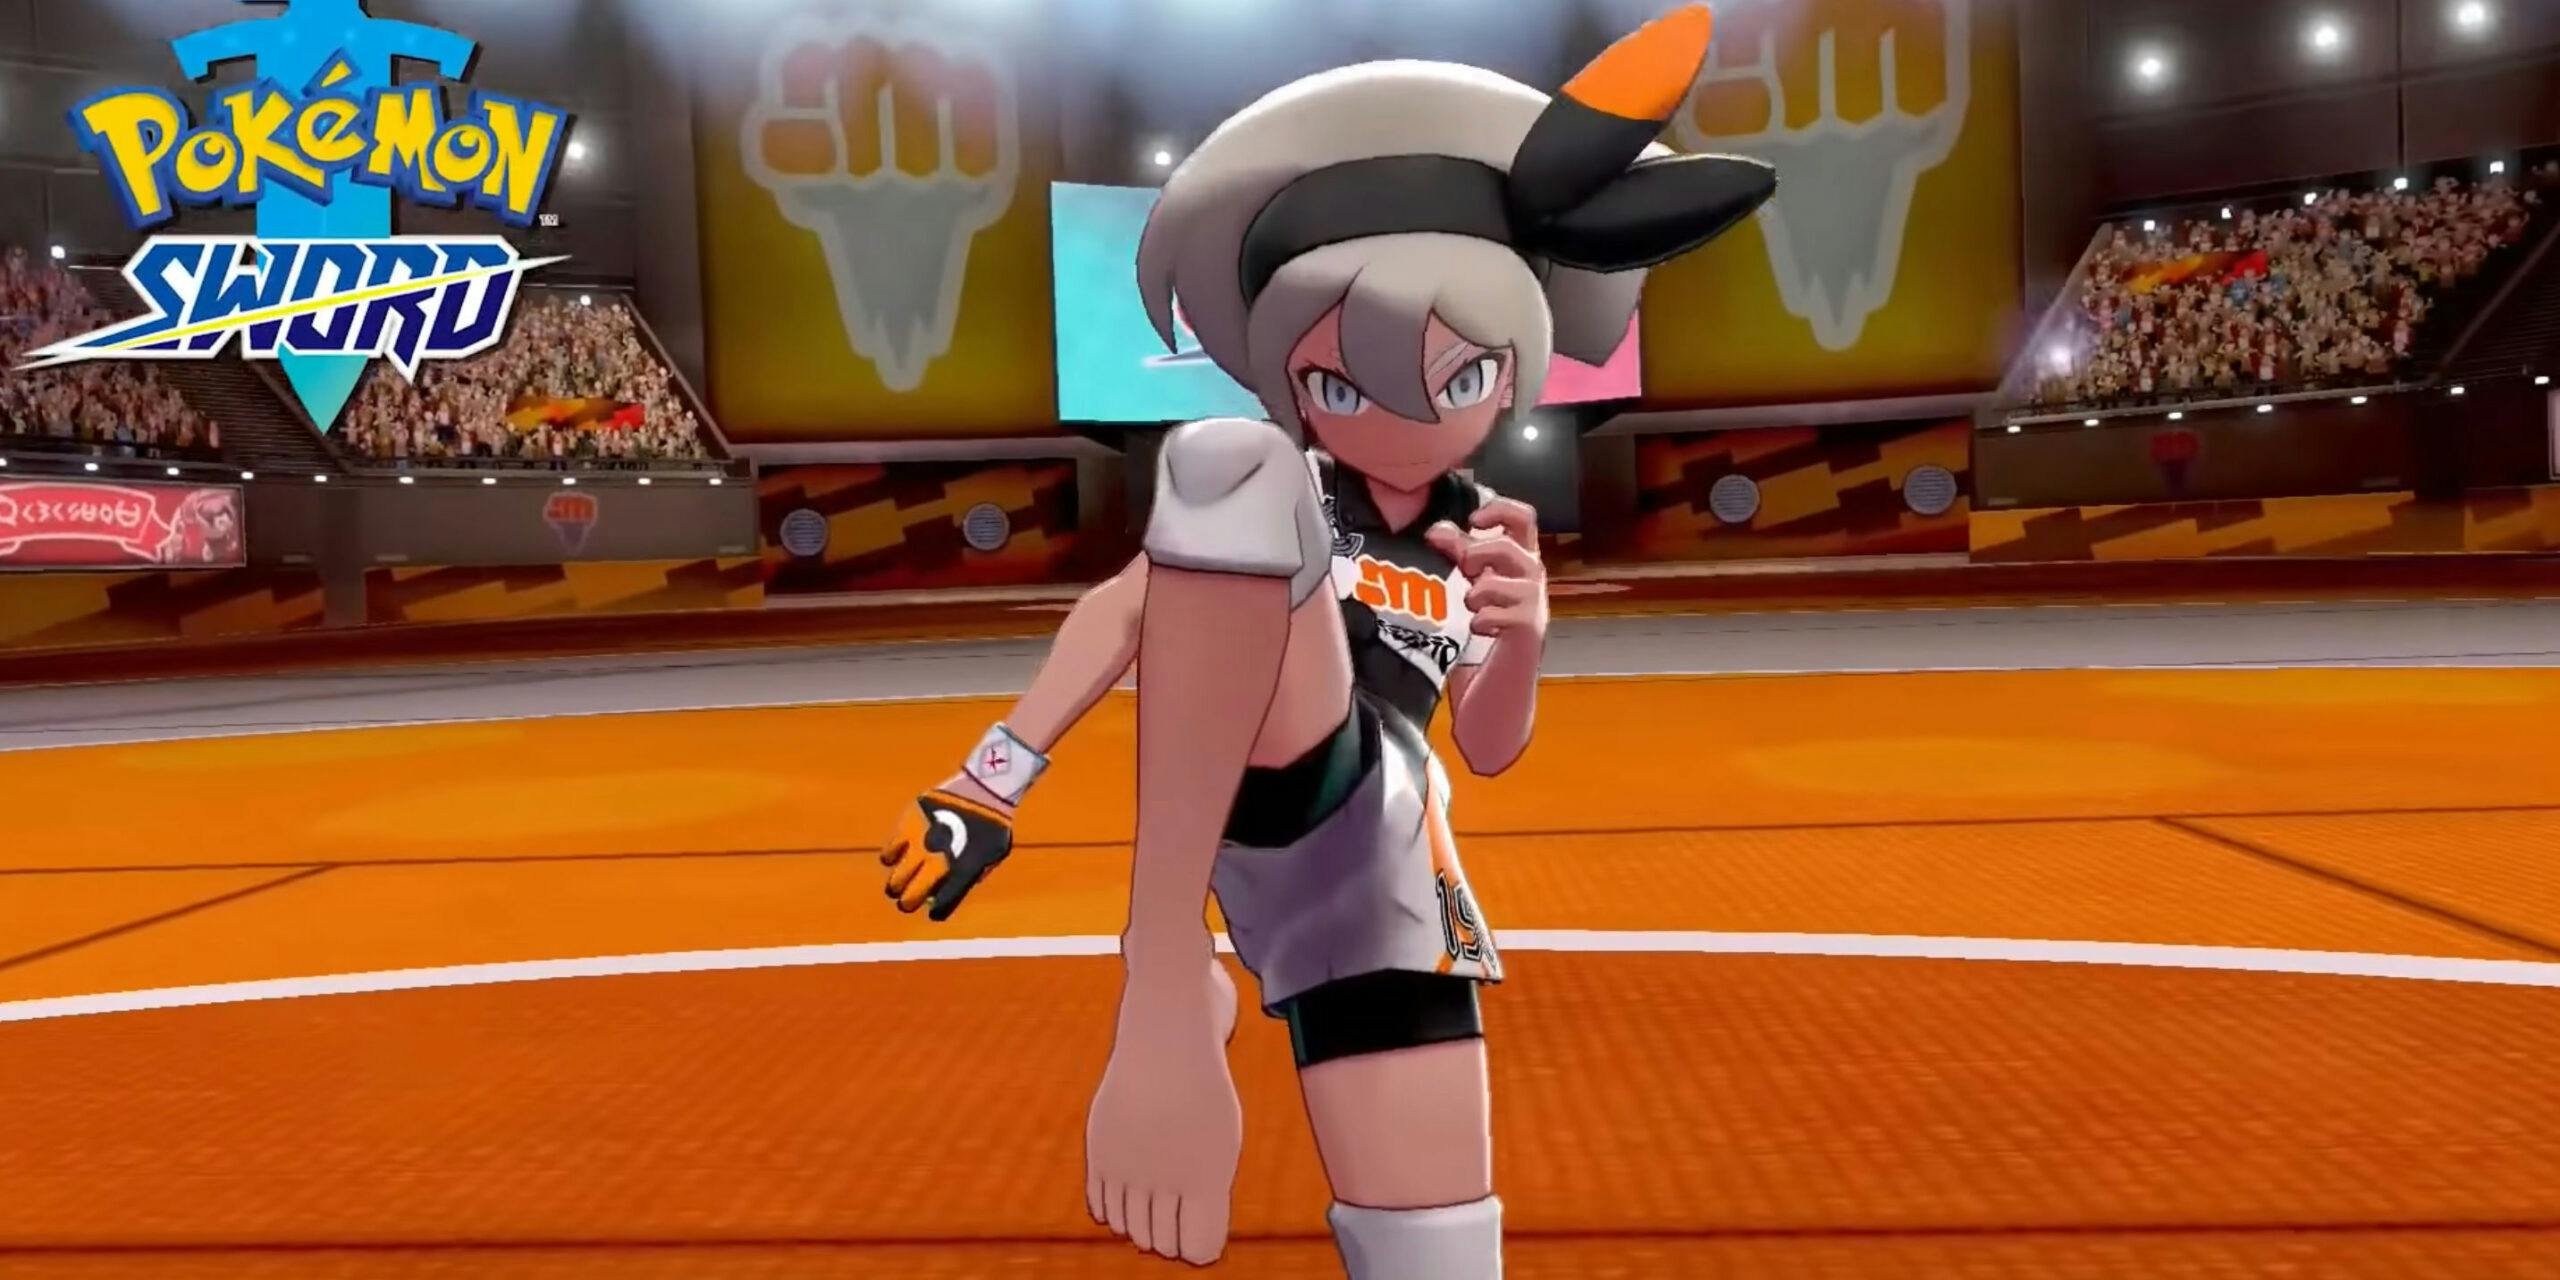 This new Pokémon gym leader is bringing out everyone’s inner foot fetishist